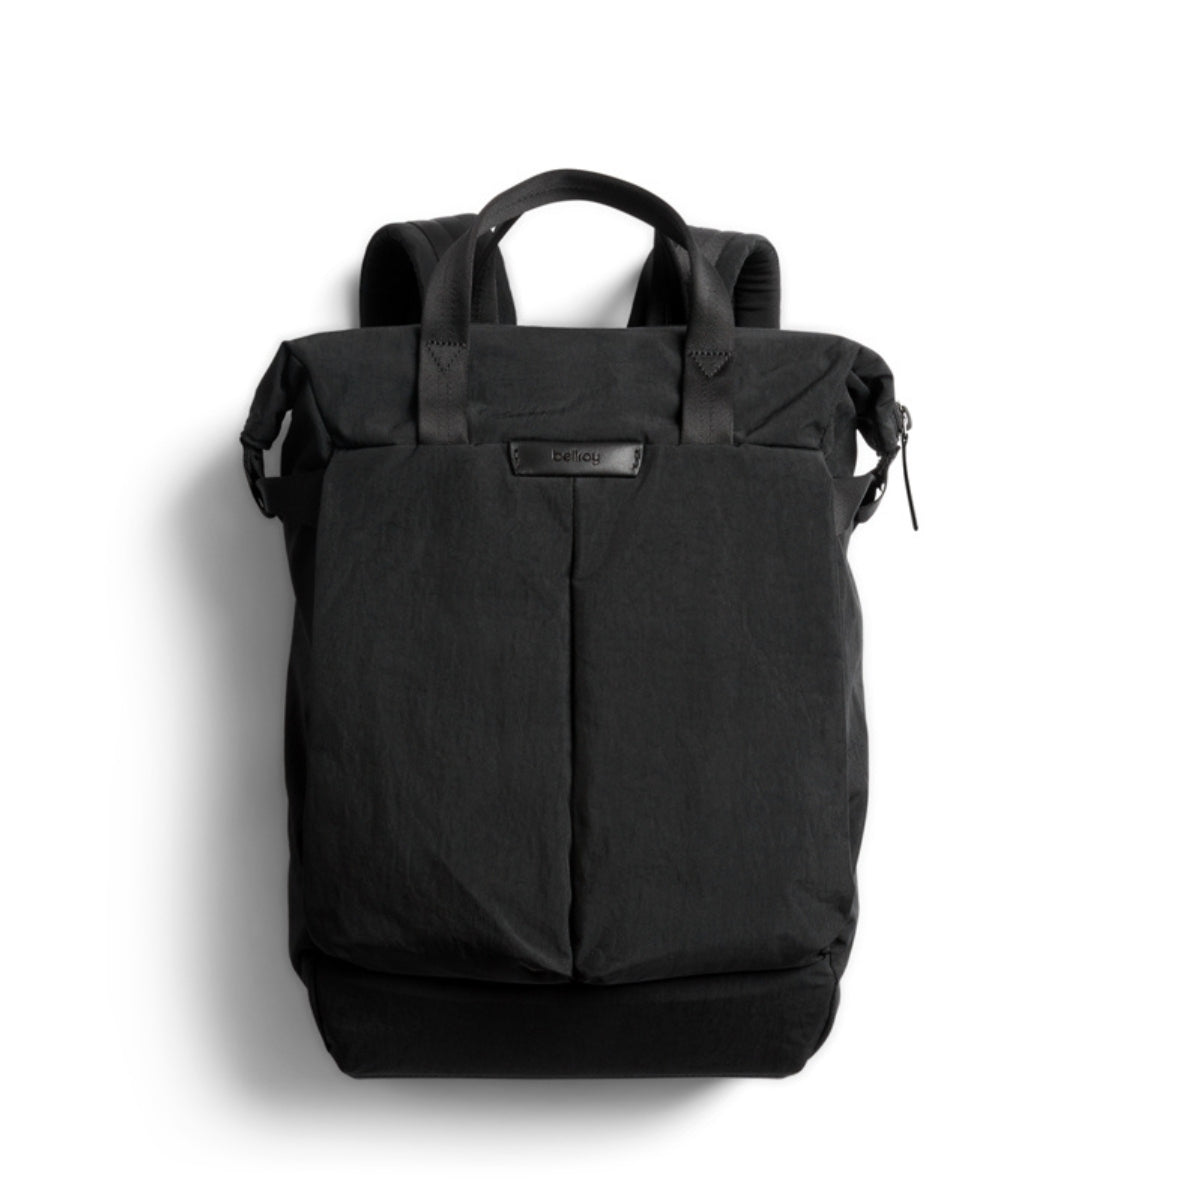 Bellroy Tokyo Totepack Compact in Raven